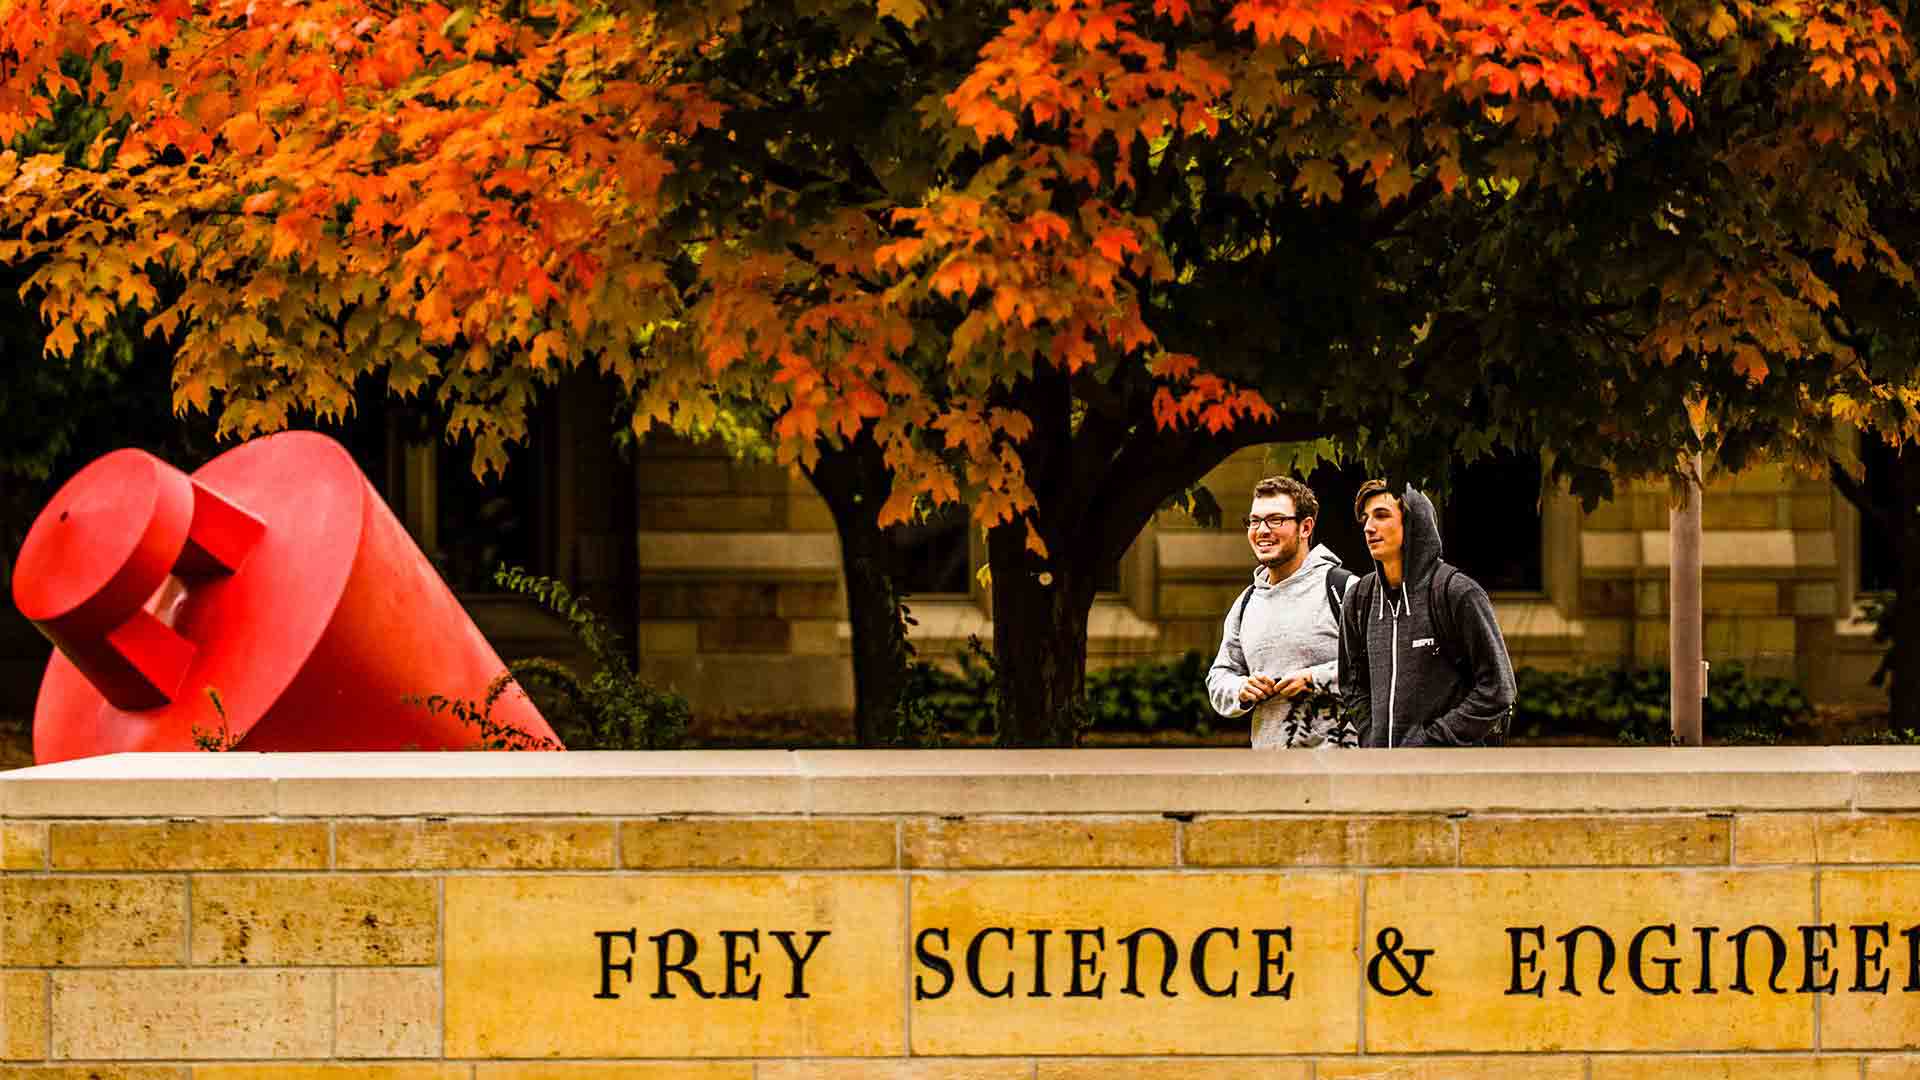 The Frey Science and Engineering Center, with O'Shaughnessy Science Hall at right and Owens Science Hall at left.